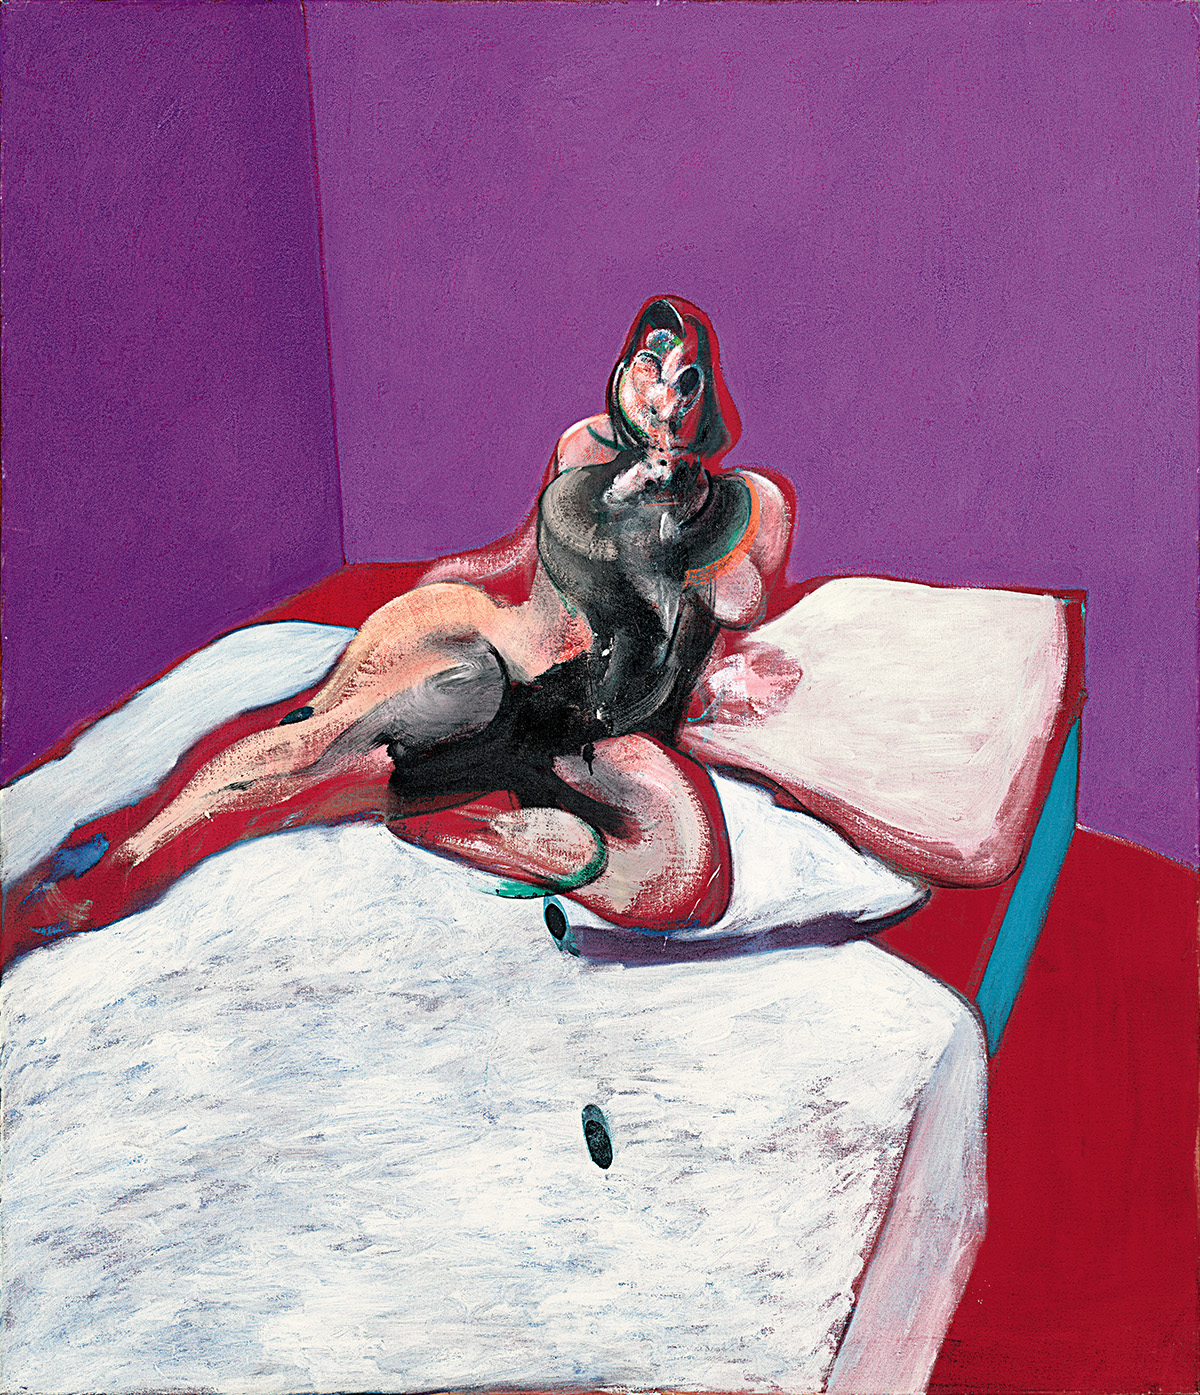 Francis Bacon, Portrait of Henrietta Moraes, 1963. Oil on canvas. CR number 63-13. © The Estate of Francis Bacon / DACS London 2020. All rights reserved.